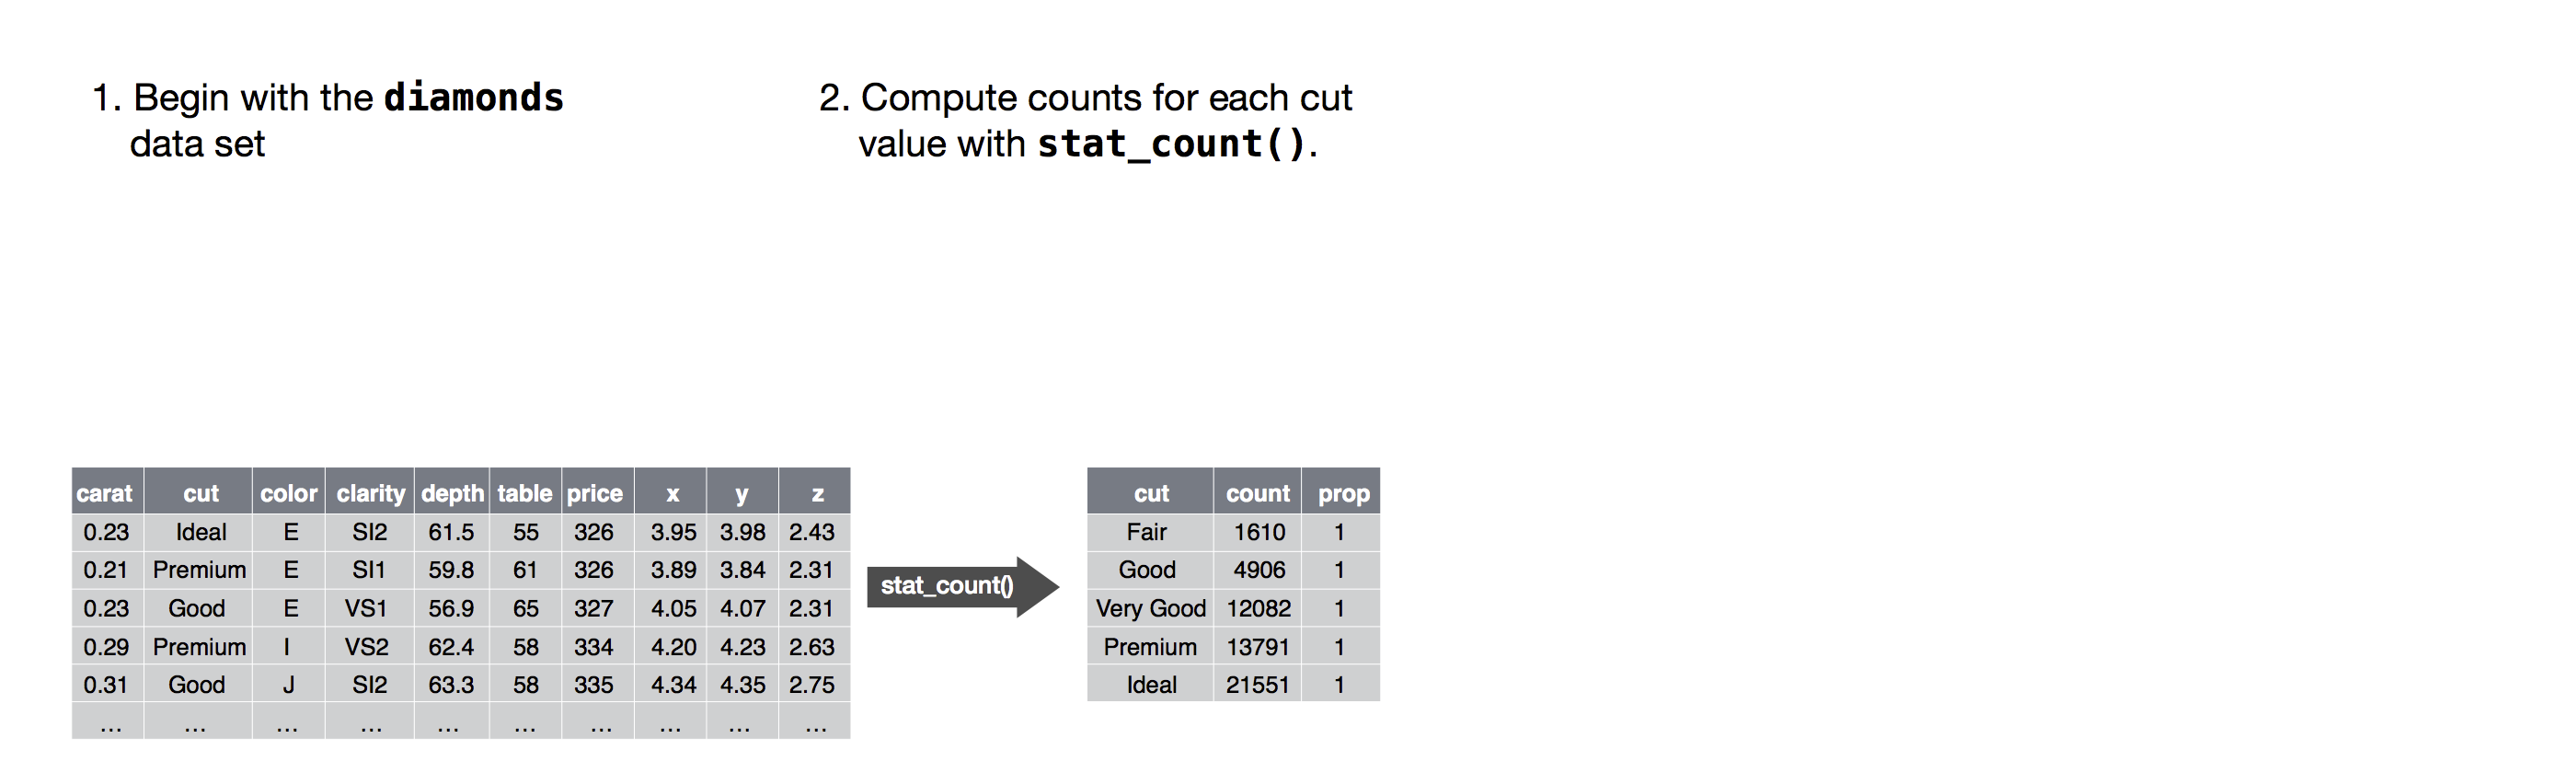 A figure demonstrating the steps for going from raw data (ggplot2::diamonds) to table of counts where each row represents one level of cut and a count column shows how many diamonds are in that cut level. Steps 1 and 2 are annotated: 1. Begin with the diamonds dataset. 2. Compute counts for each cut value with stat_count().